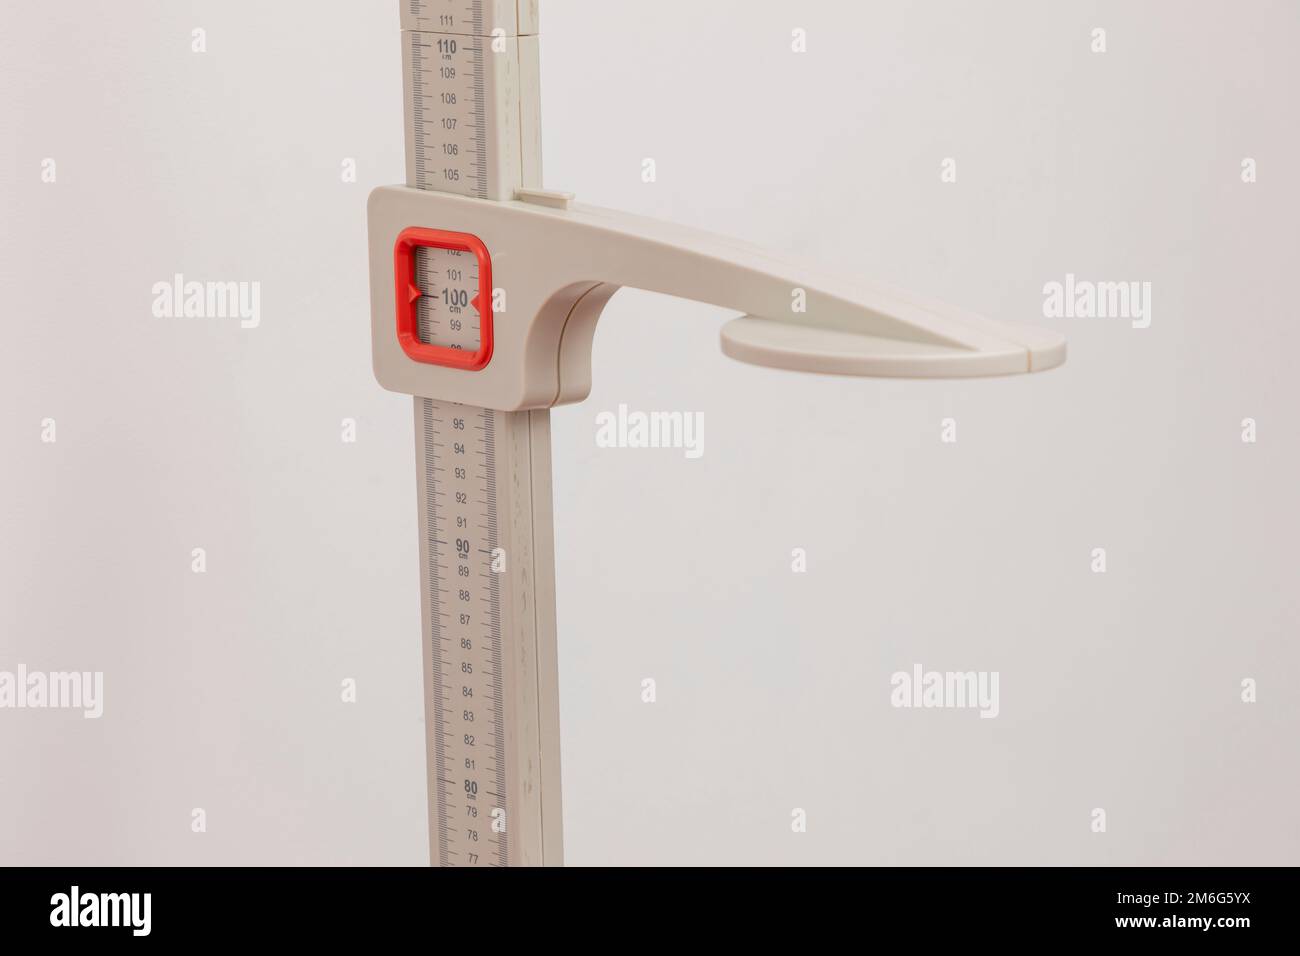 Ruler for measuring height of children with space for text. Stock Photo